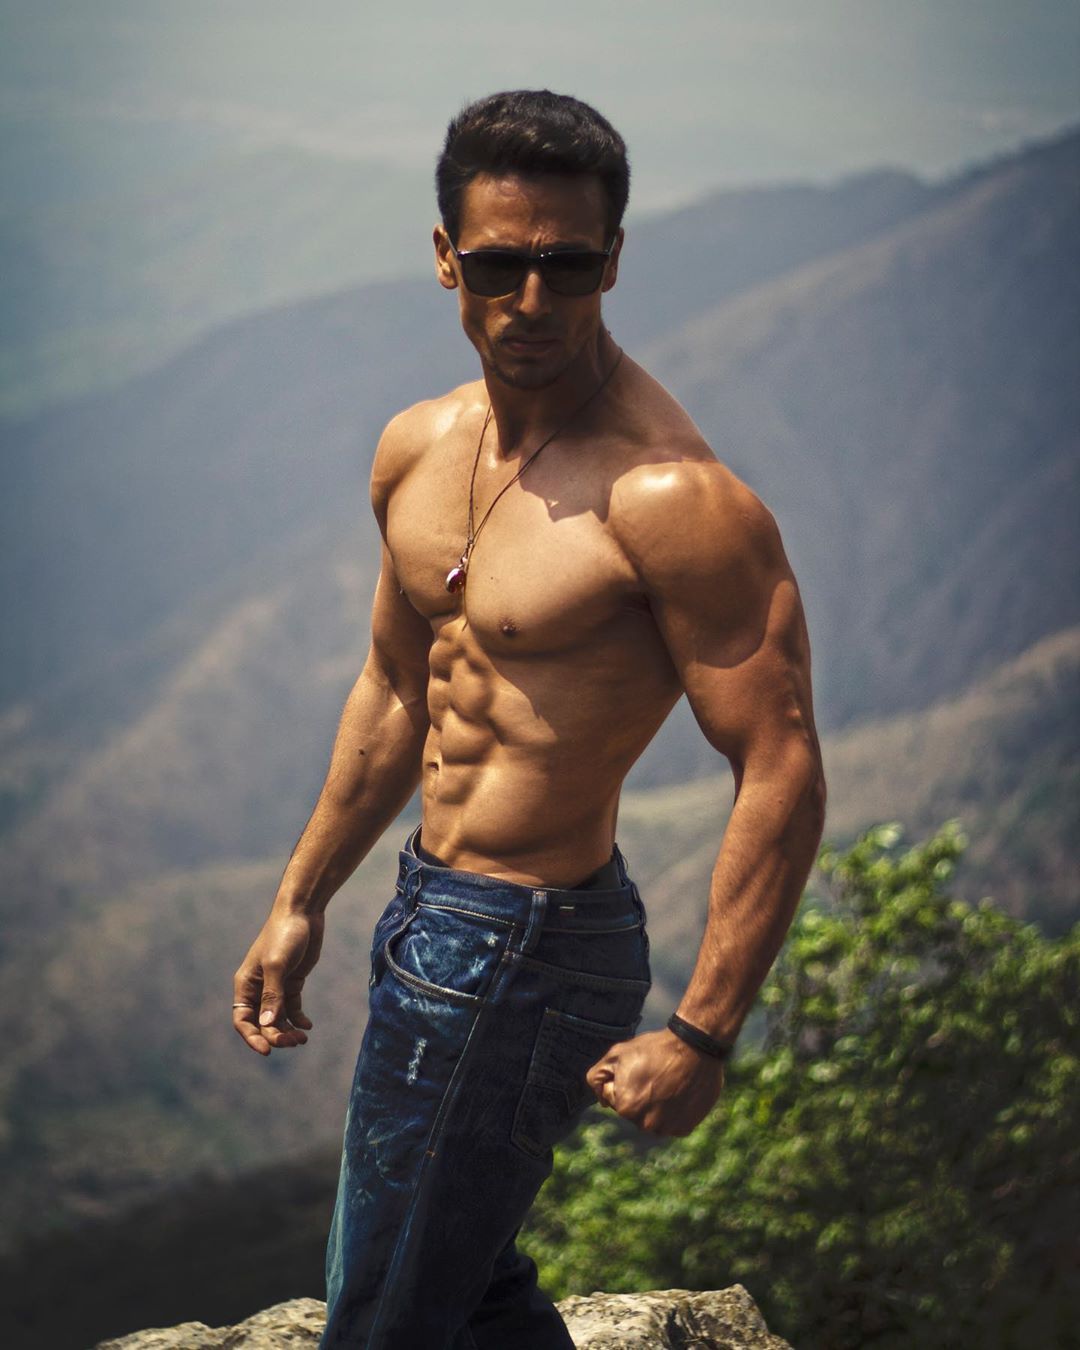 Tiger Shroff Roped In For Vikas Bahl's Two Part Sports Franchise Ganpat, The Action Star Will Be Seen Playing A Boxer